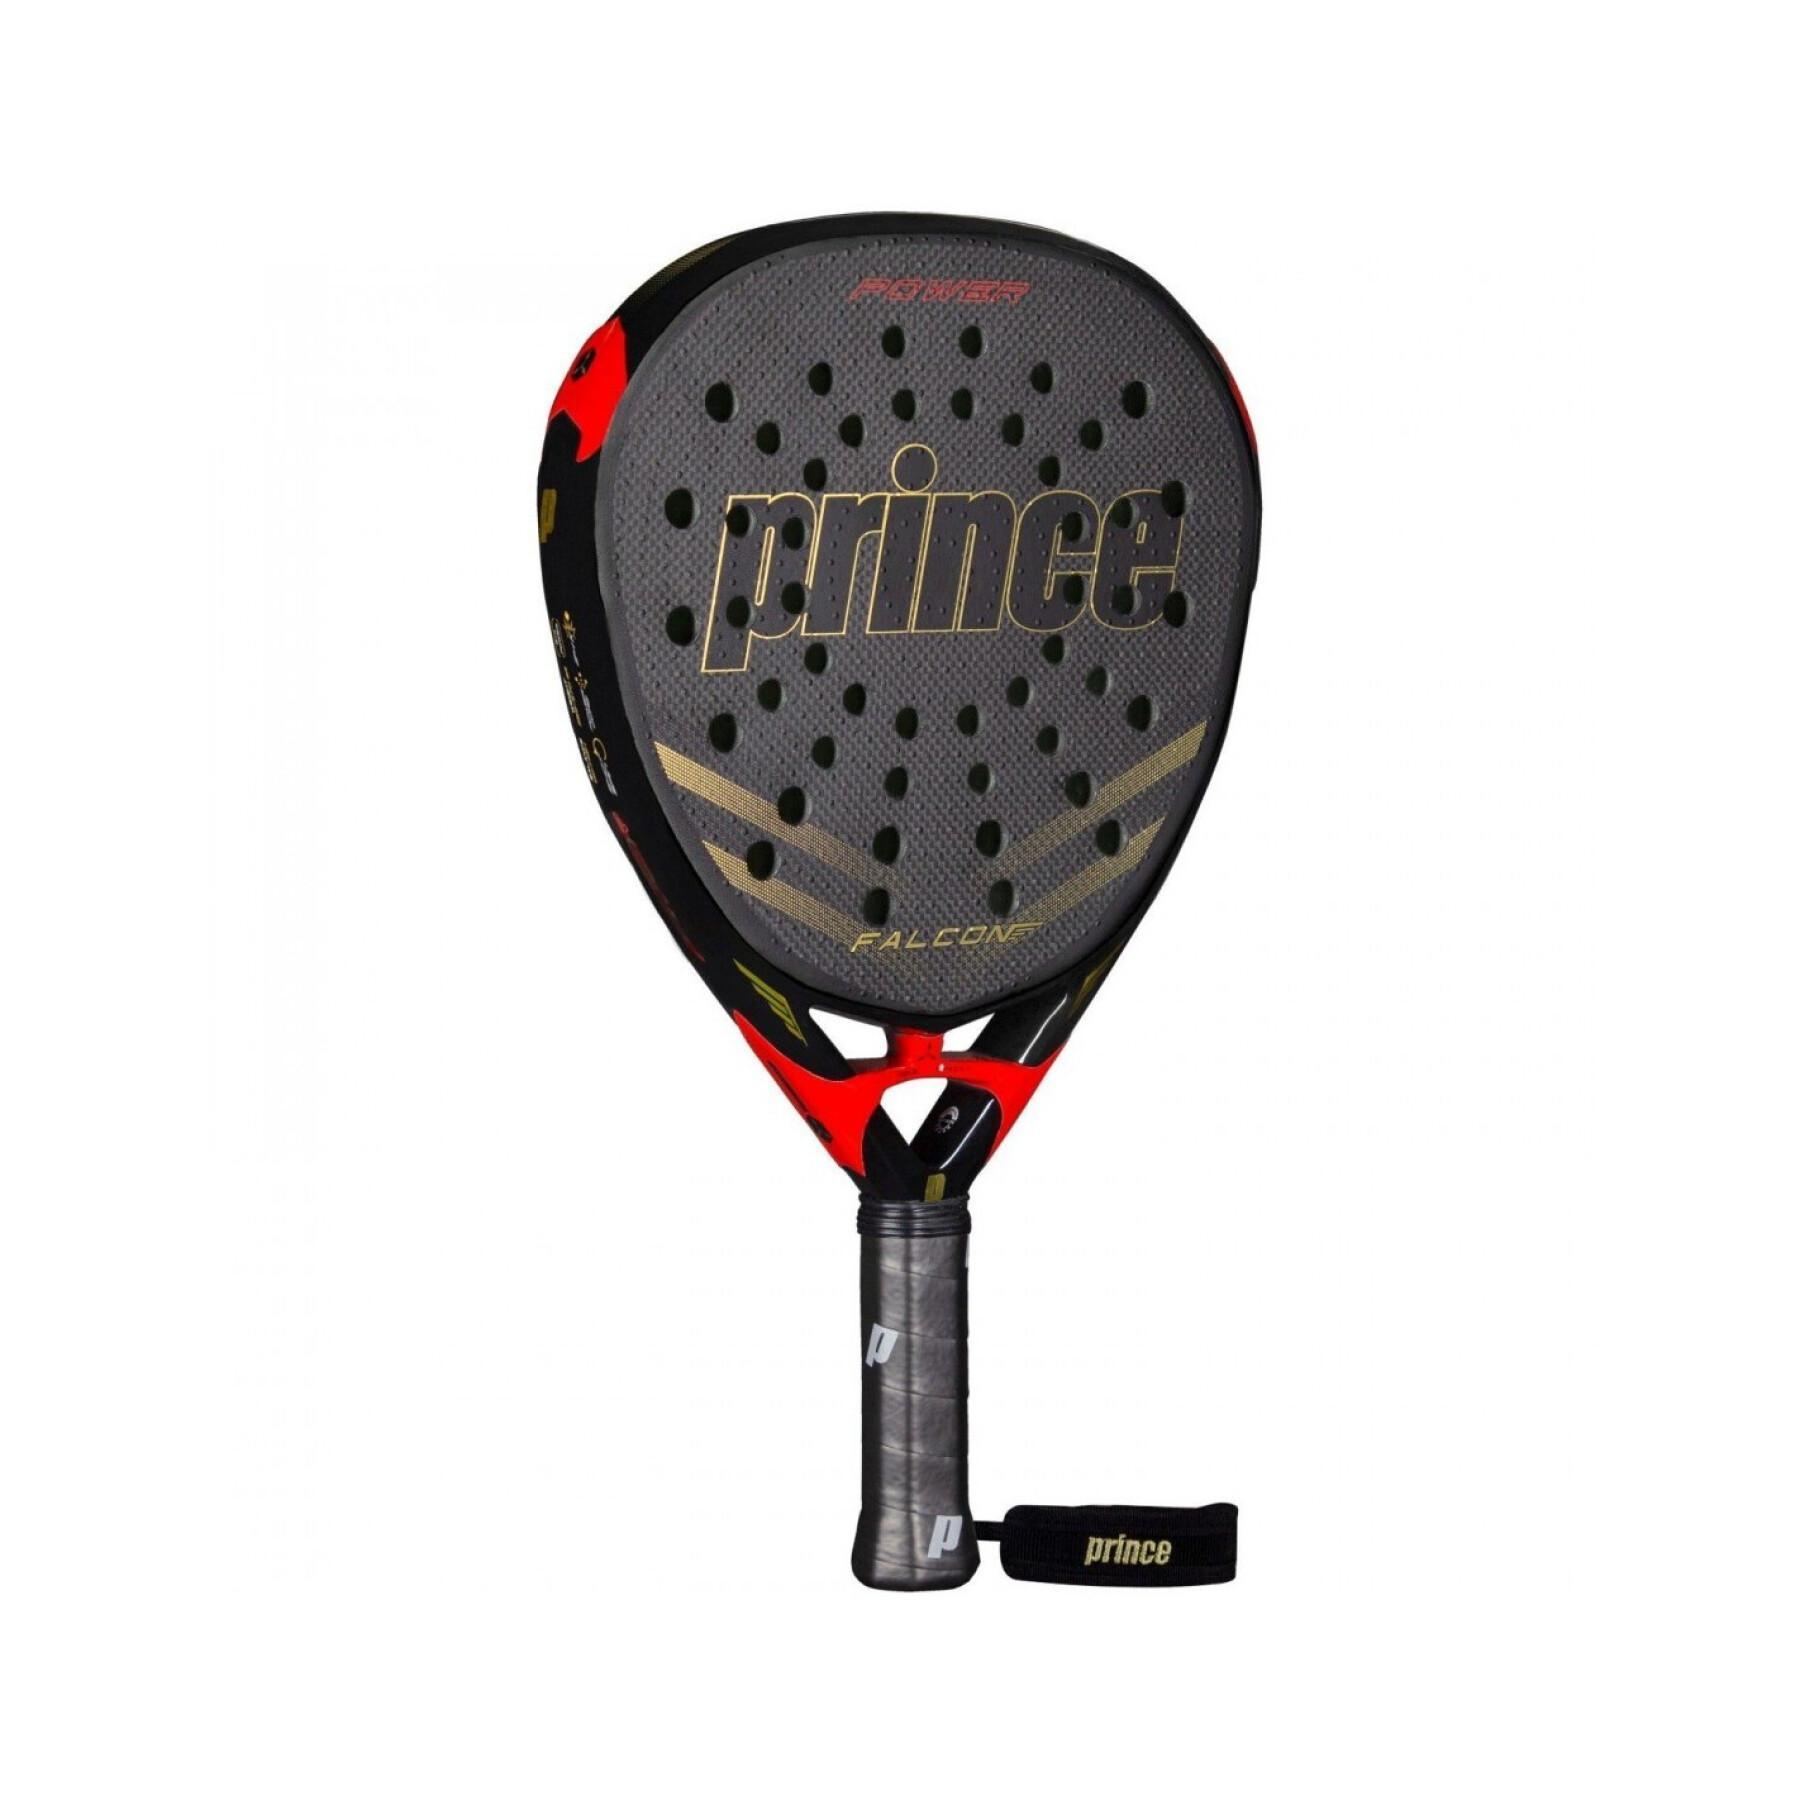 Racket from padel Prince Falcon